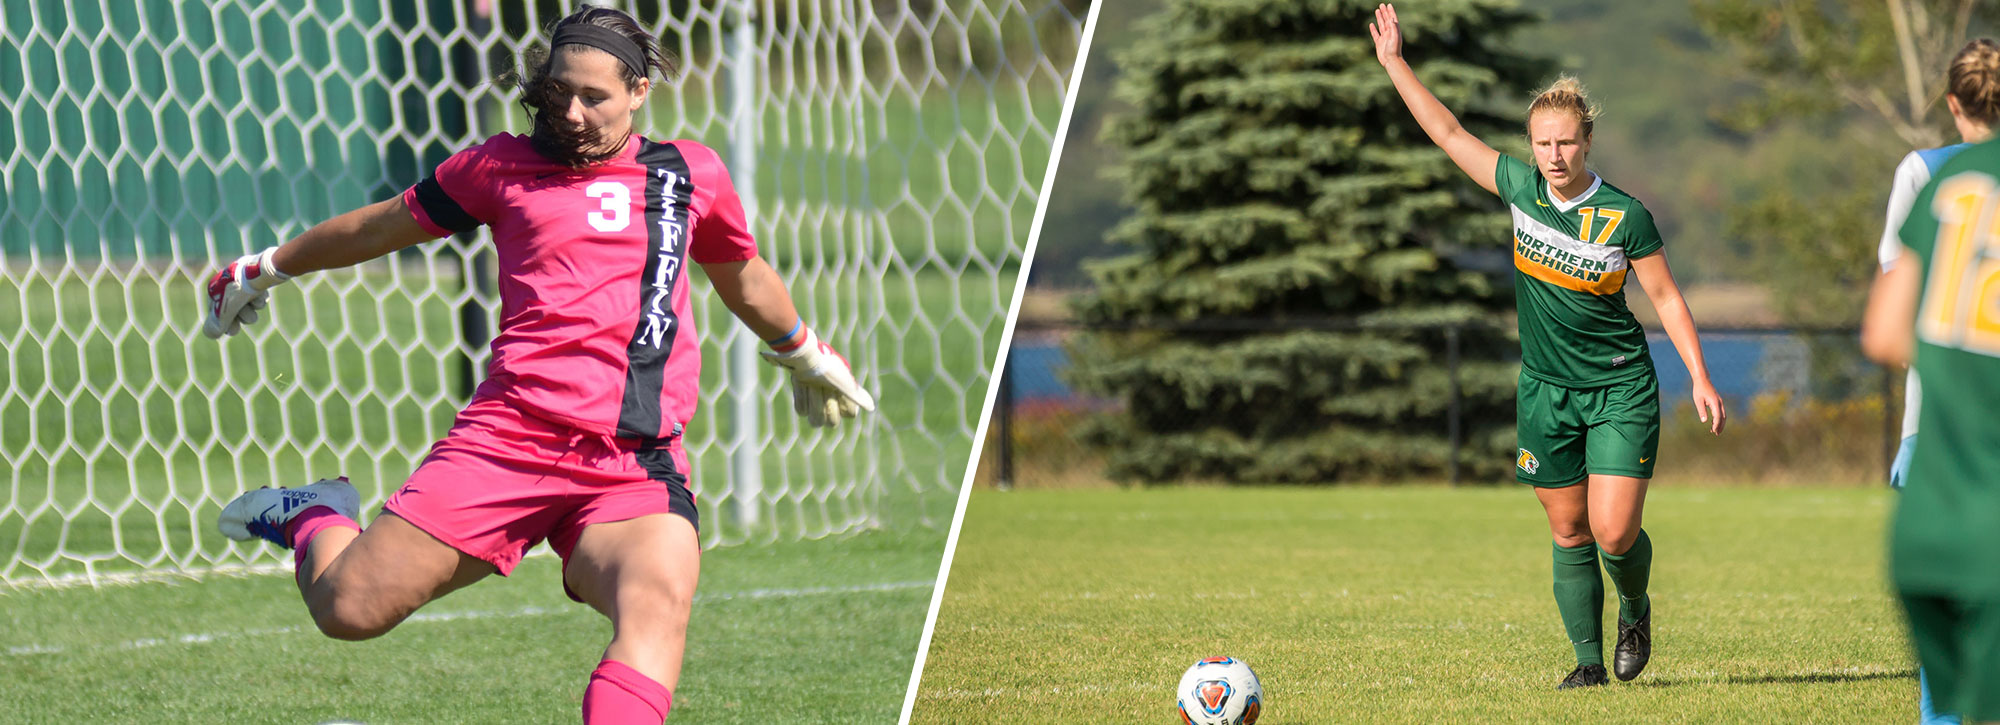 Northern Michigan's Milam, Tiffin's Ortenzi Selected GLIAC Women's Soccer Players of the Week